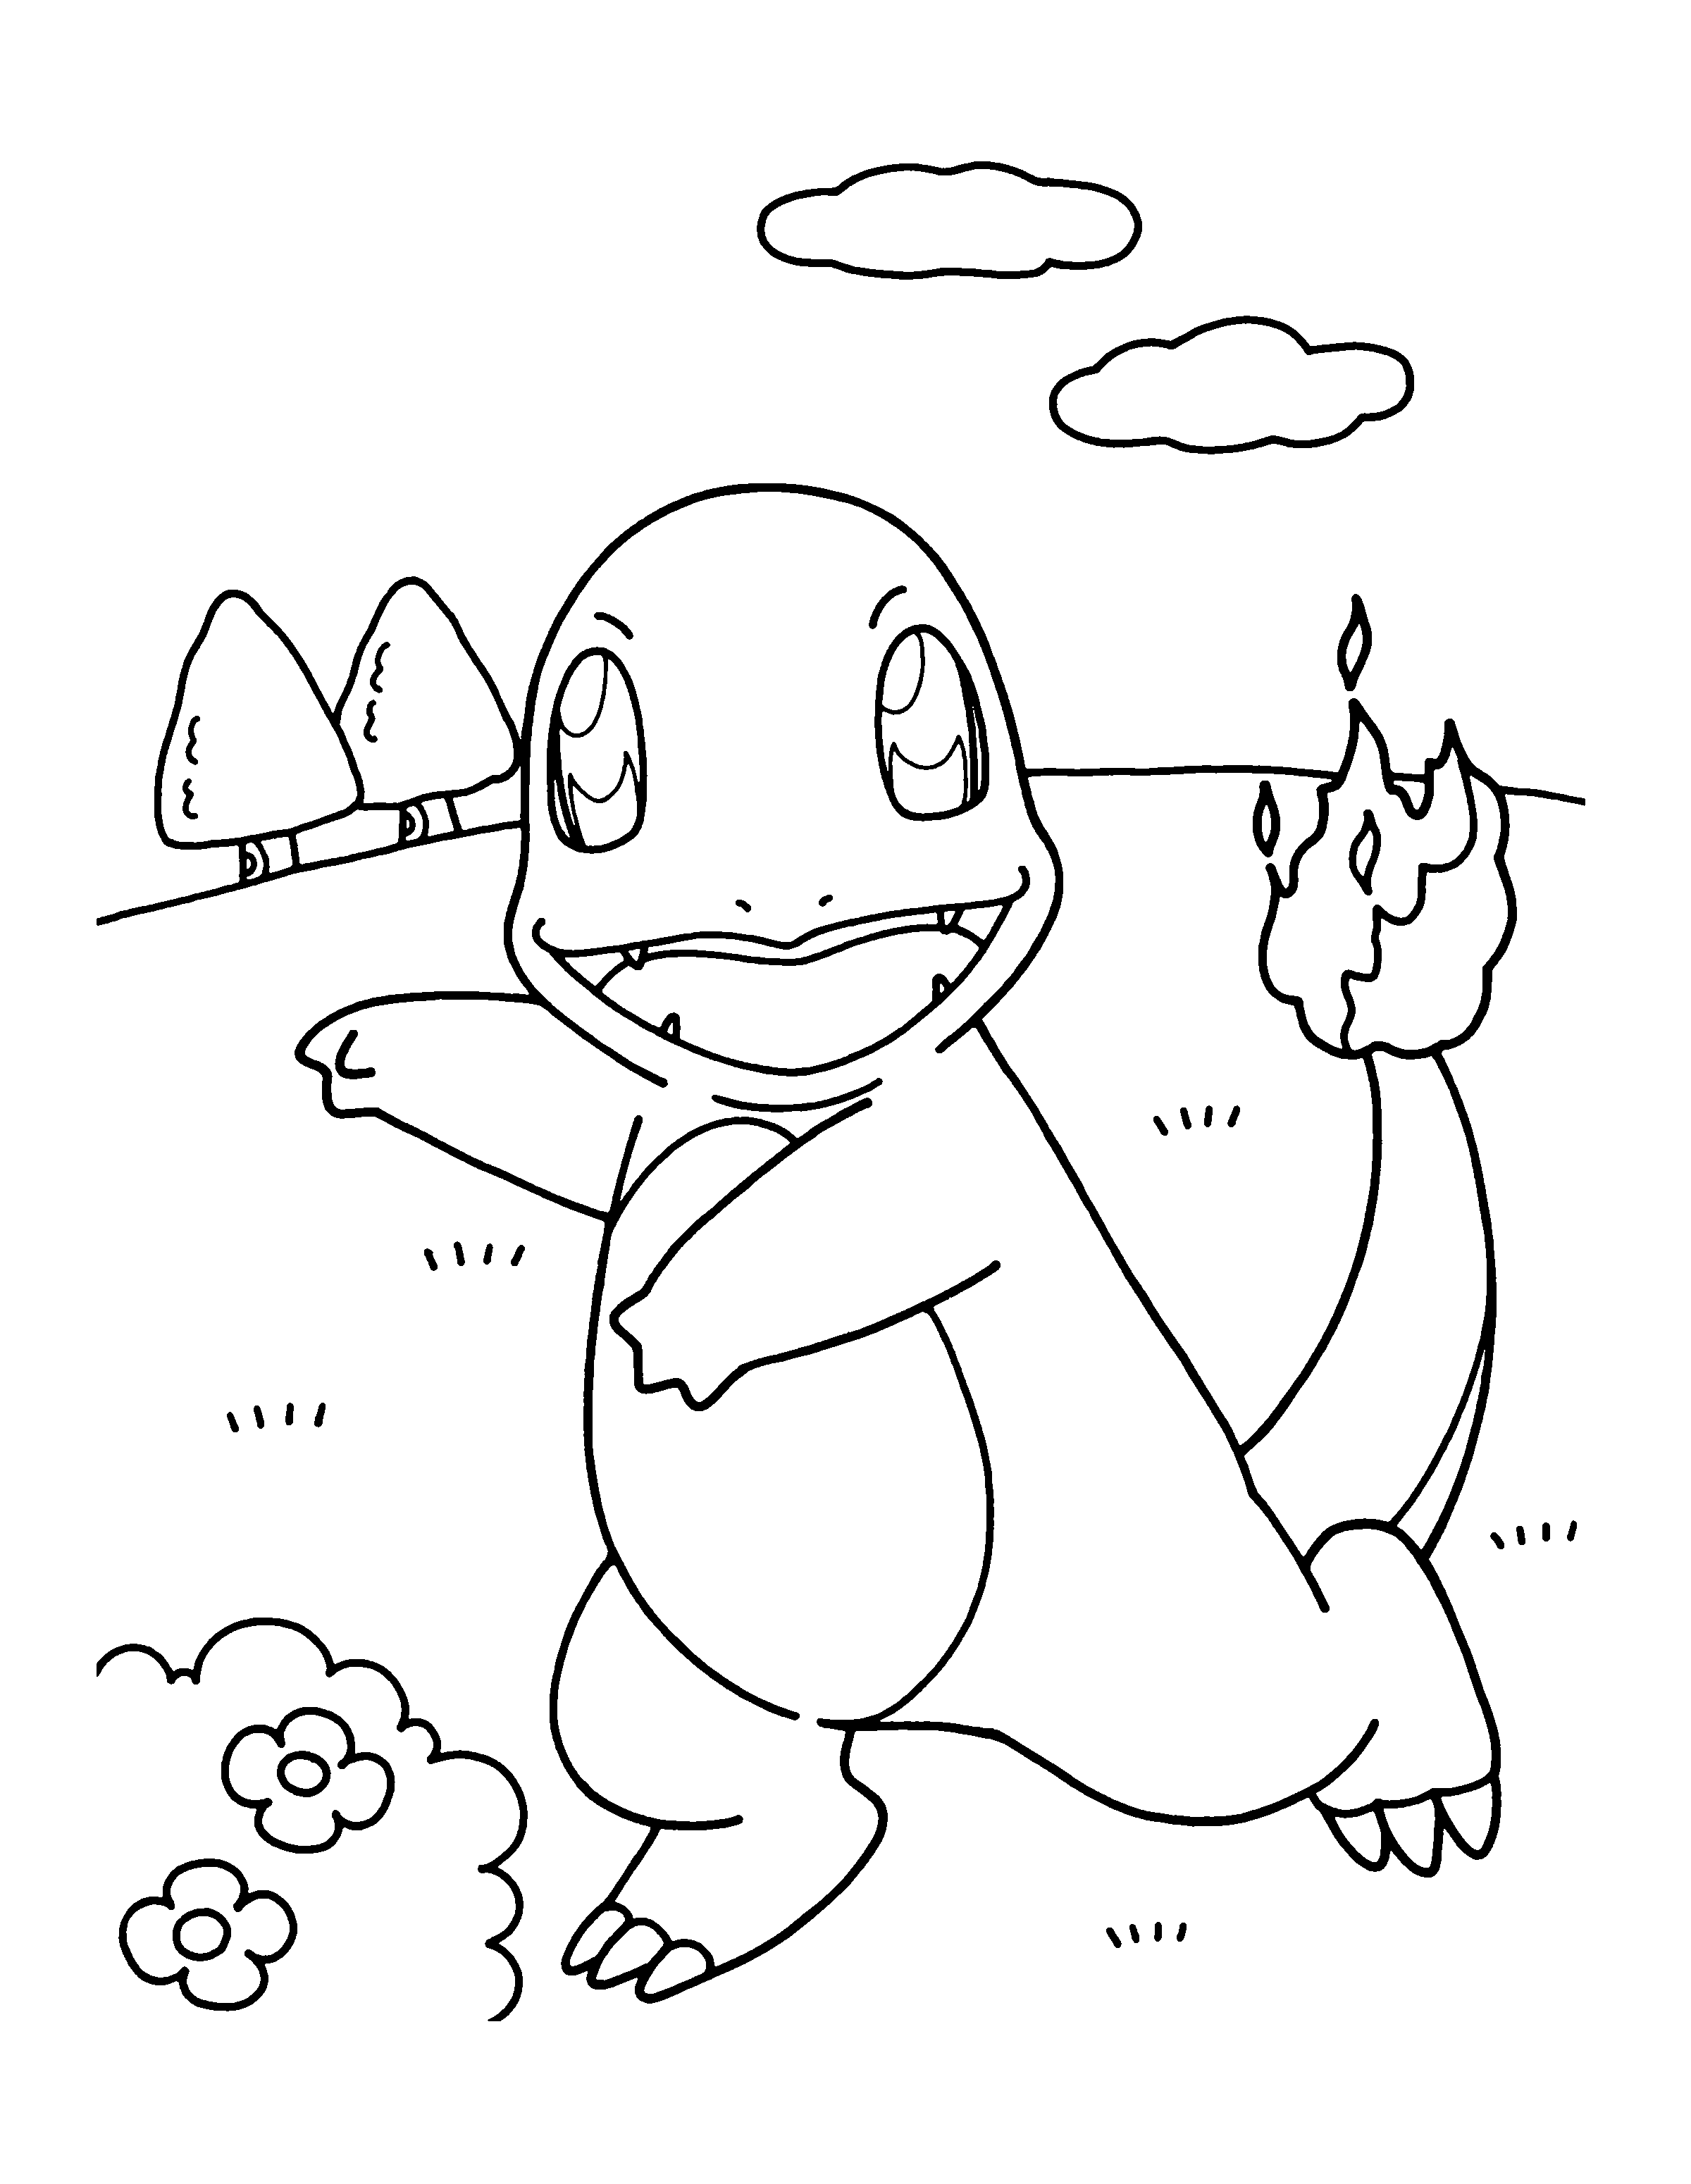 Coloring Pages - Page 4 of 231 - Free Coloring Pages for Boys ...